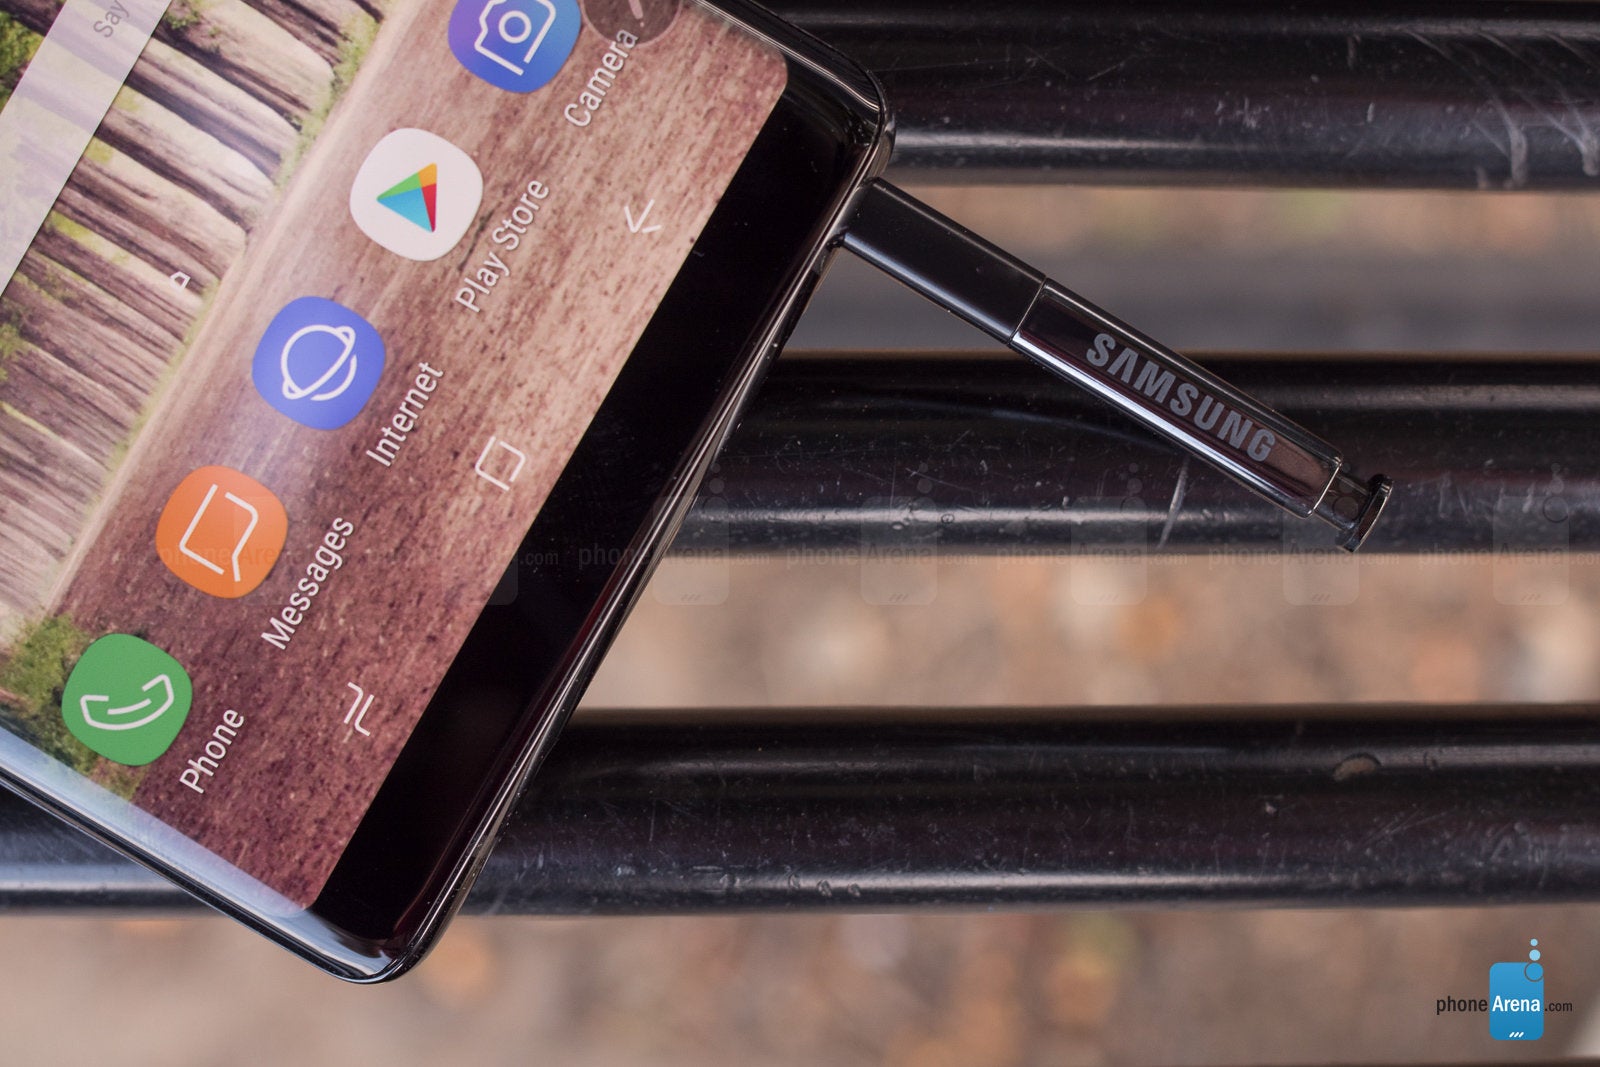 Rebuttal: No, Samsung should absolutely not ditch the S Pen